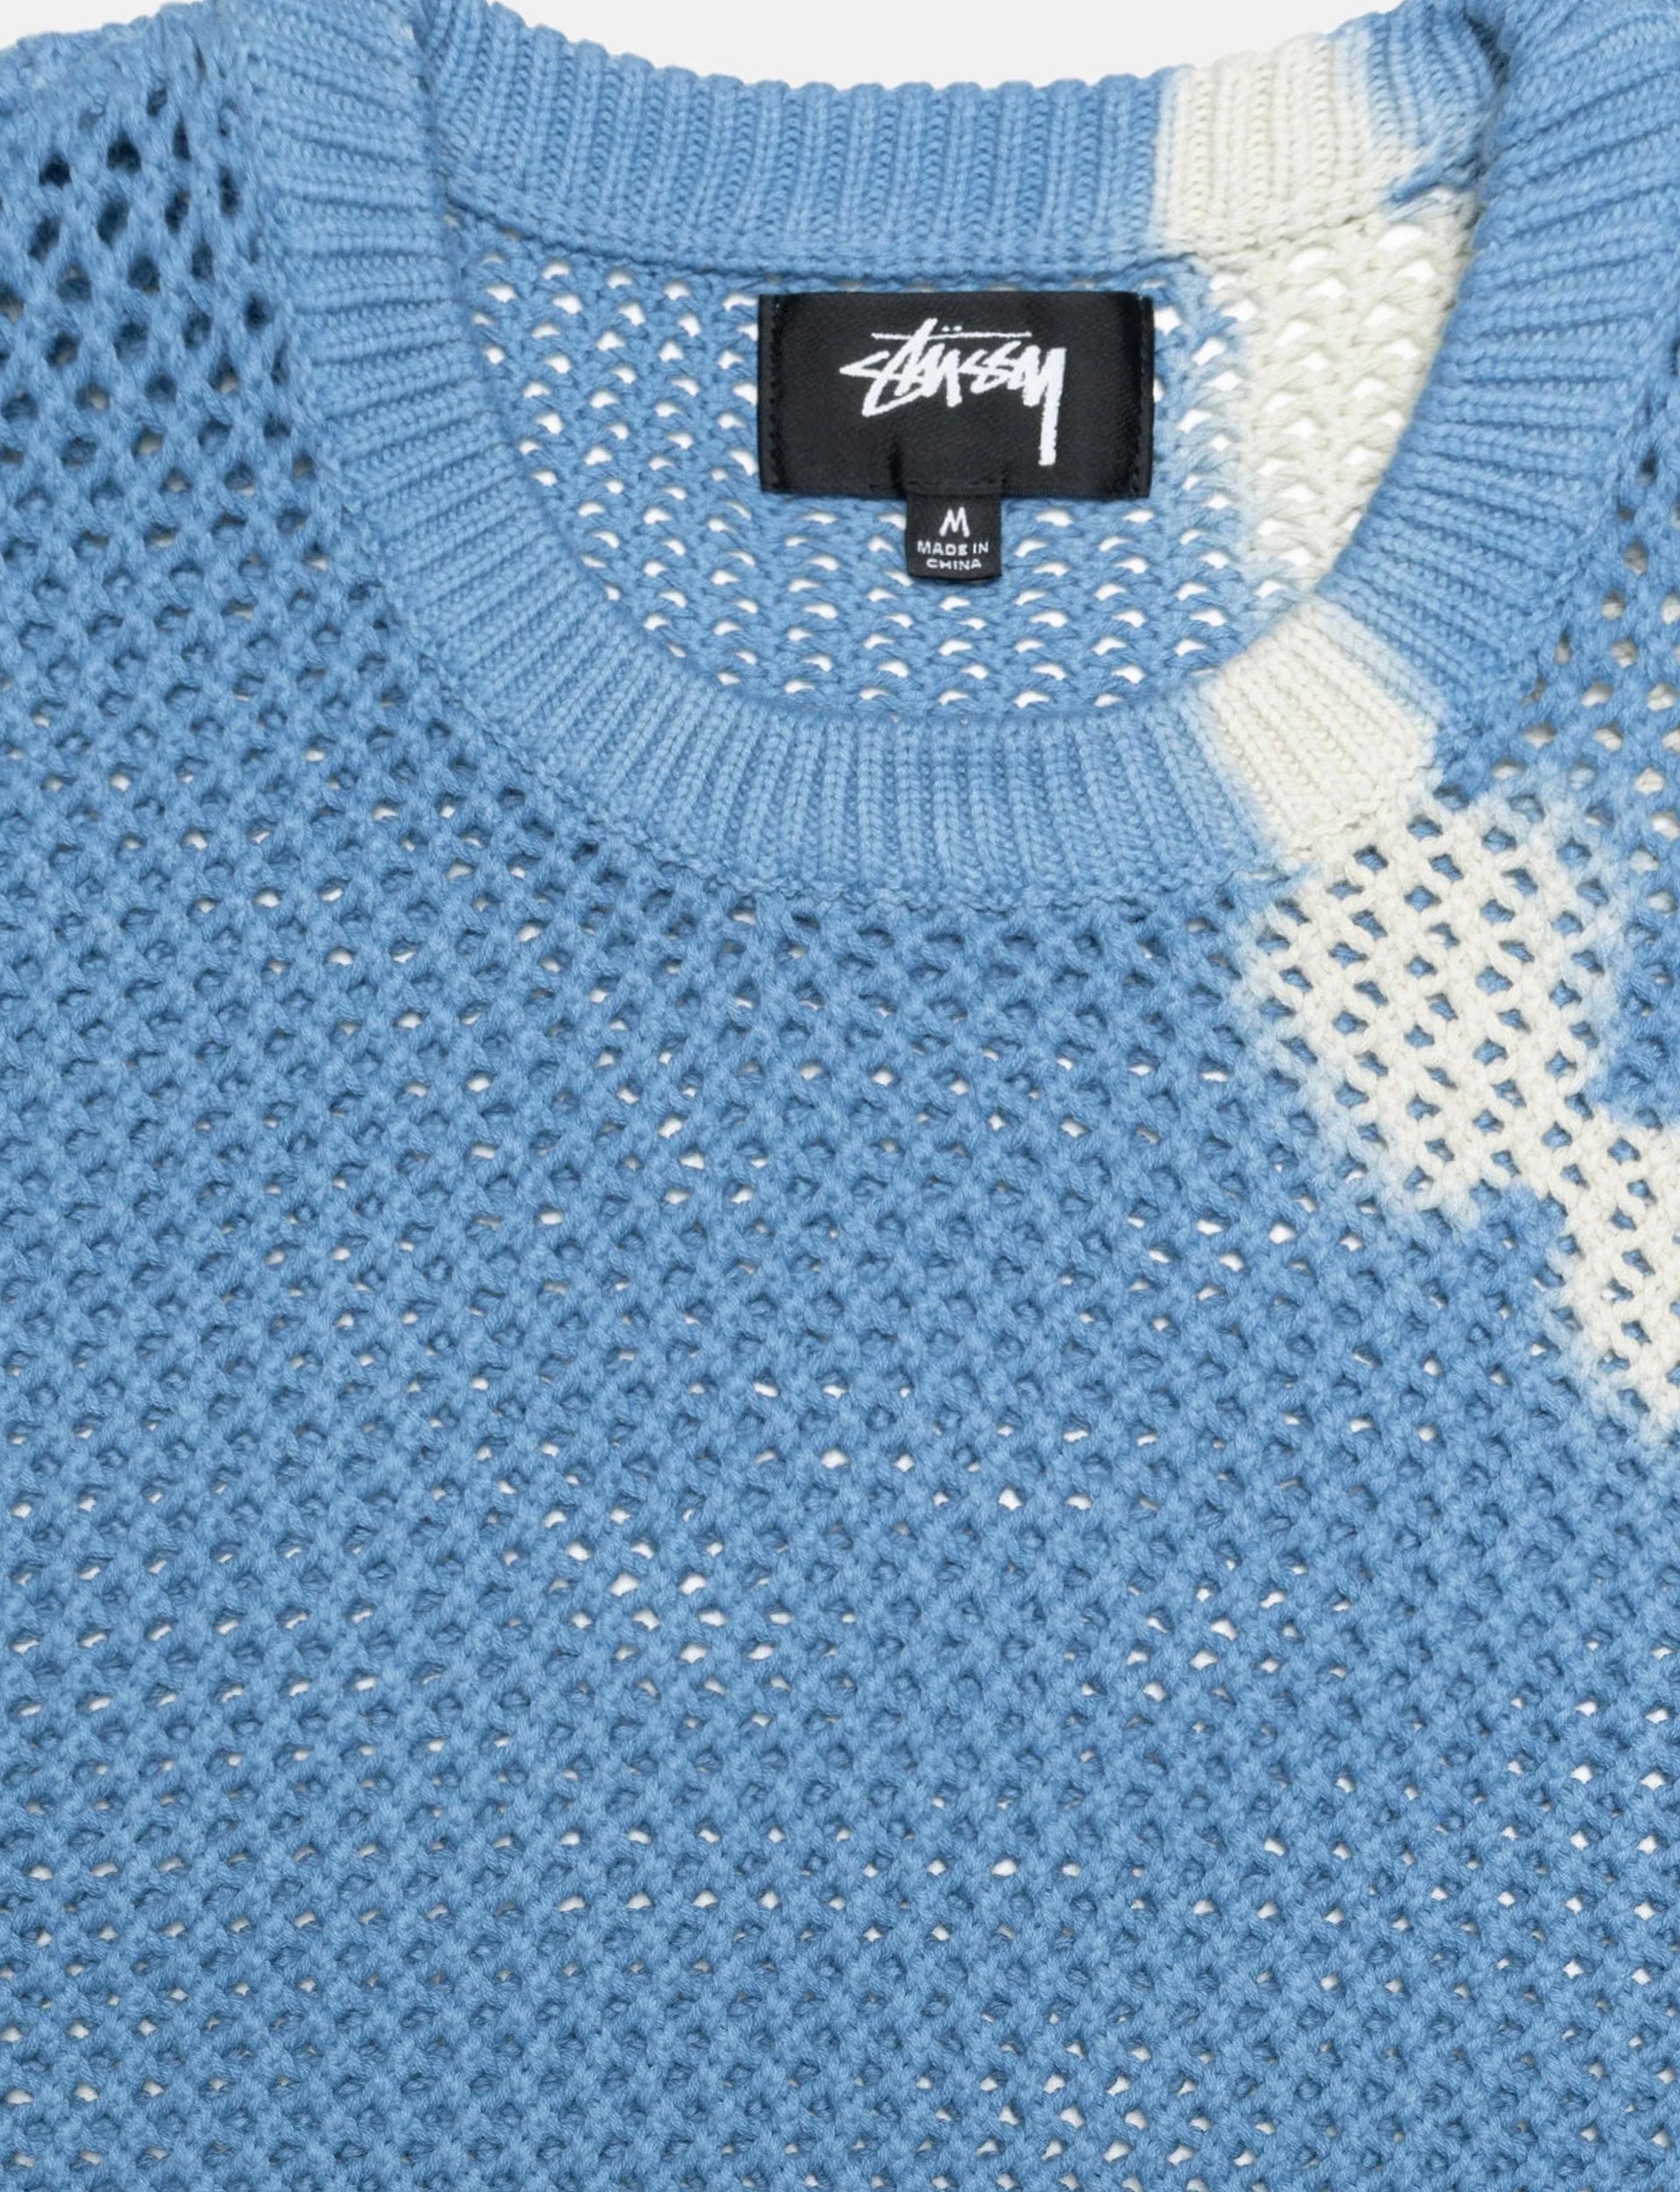 STÜSSY PIGMENT DYED LOOSE GAUGE SWEATER